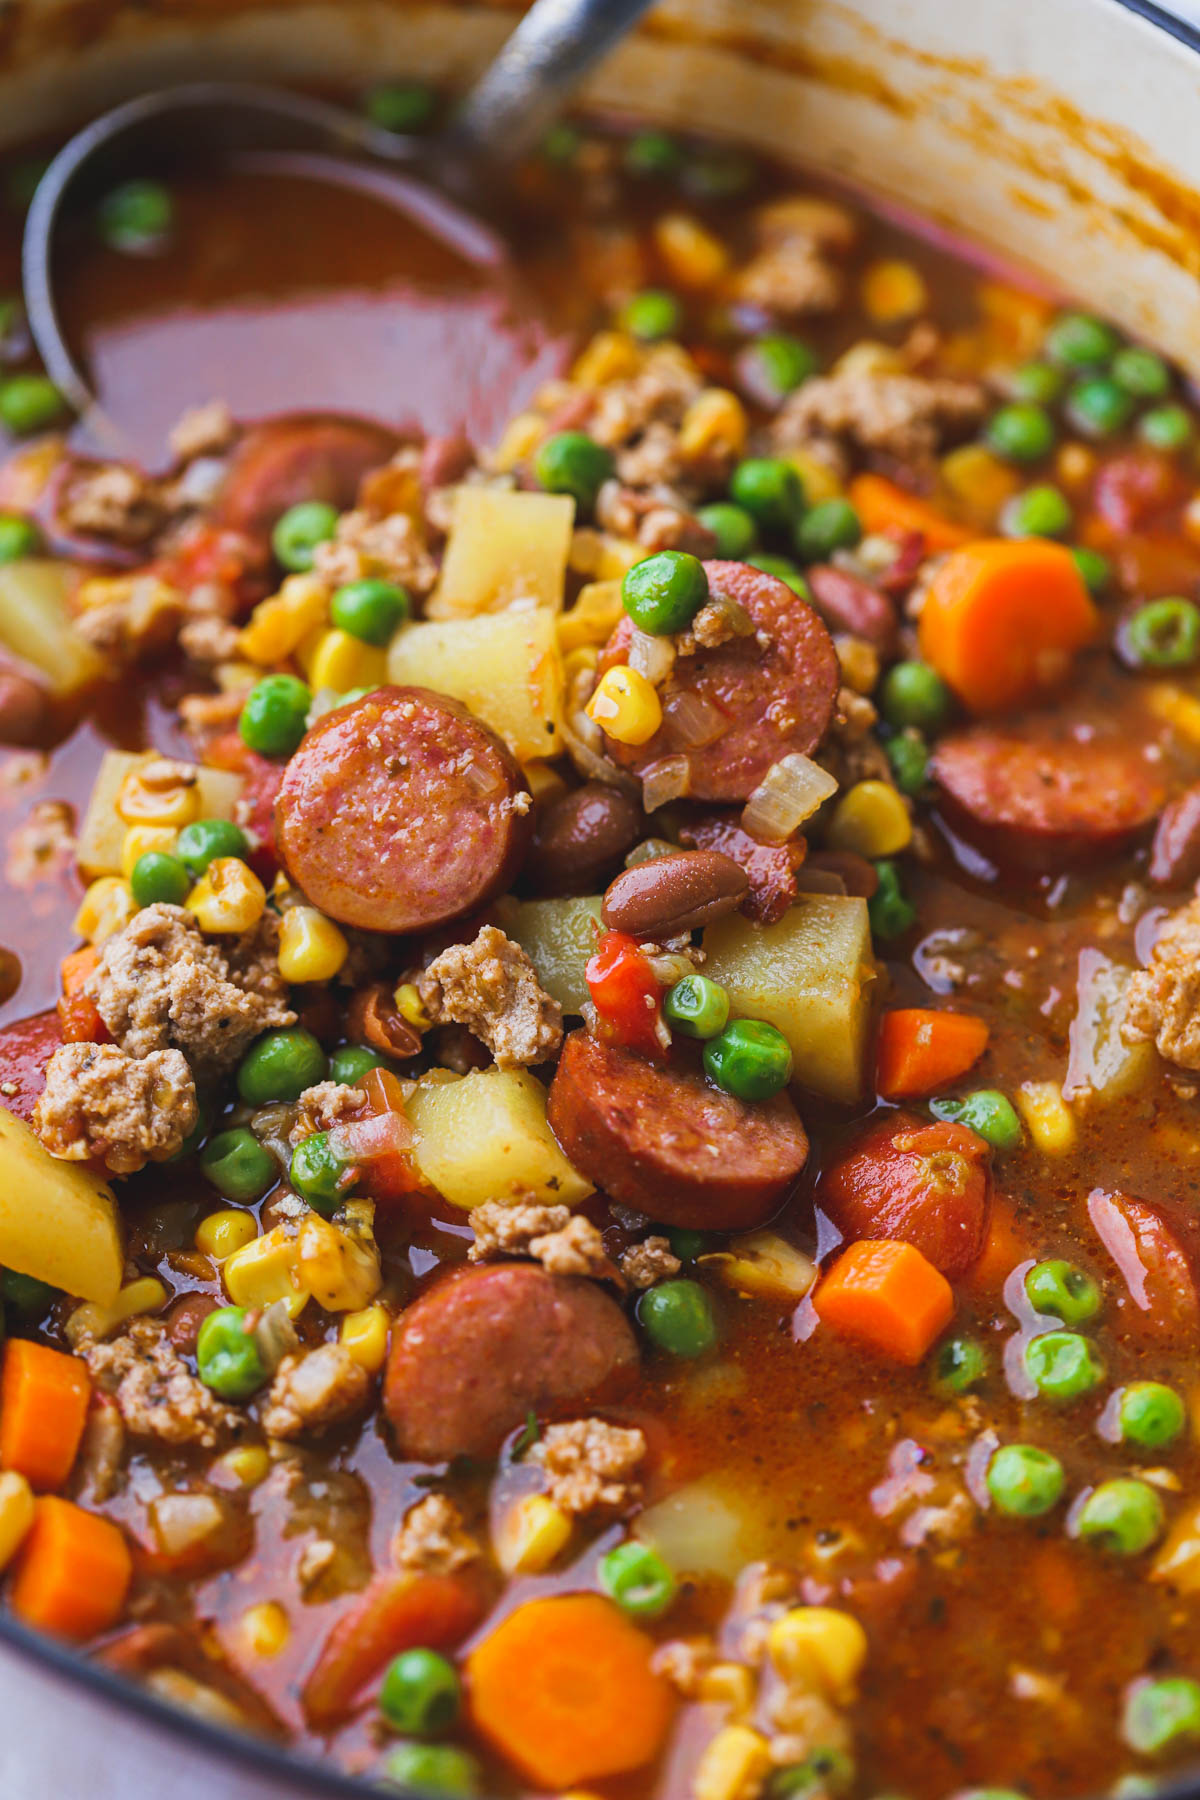 Cowboy soup made with chunks of vegetables, sausage bacon and beans.  